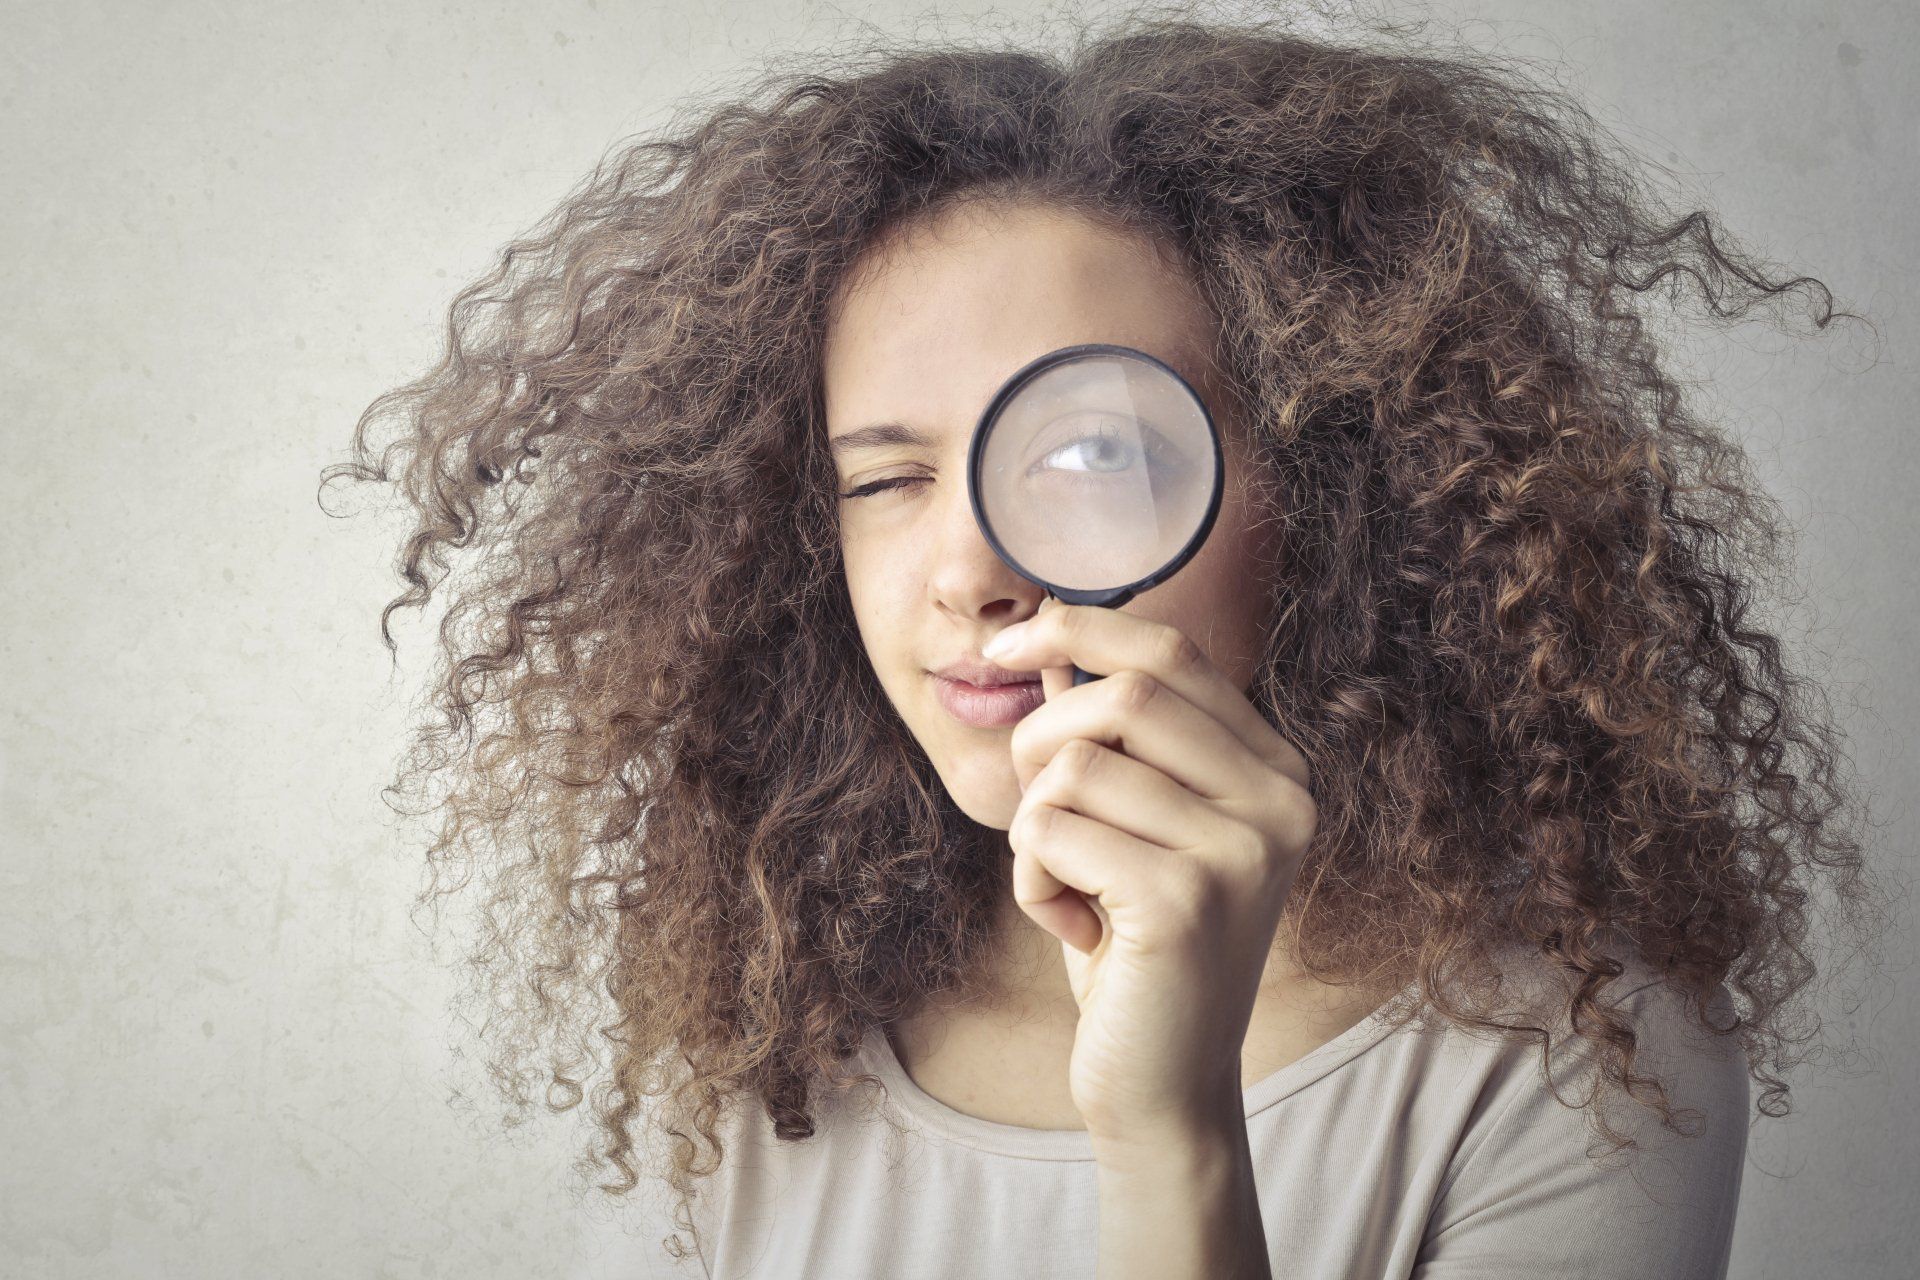 a woman with curly hair is looking through a magnifying glass